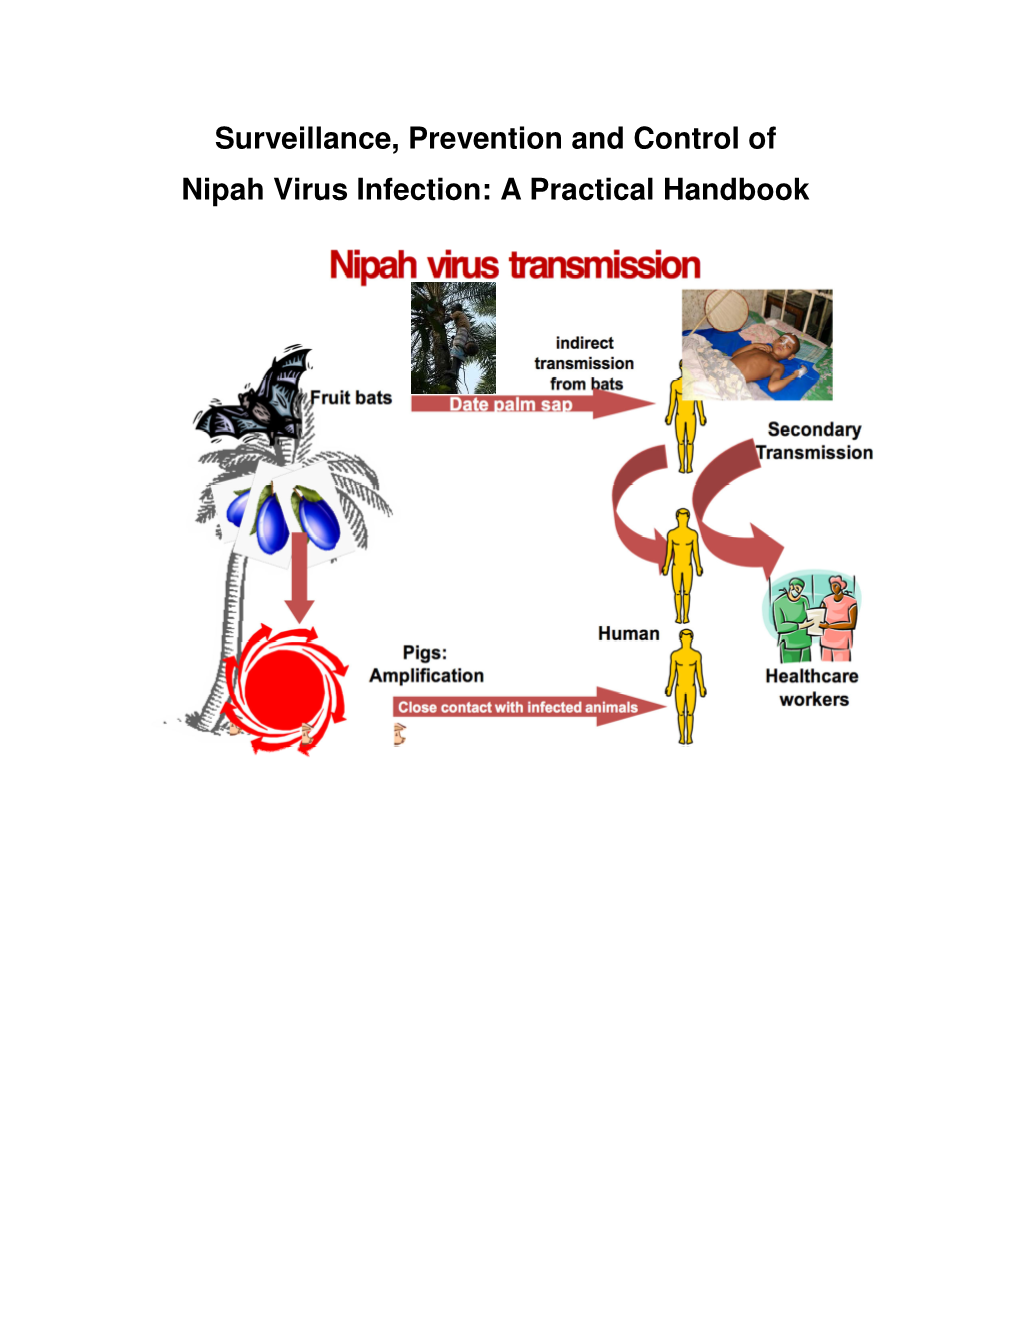 Surveillance, Prevention and Control of Nipah Virus Infection: a Practical Handbook